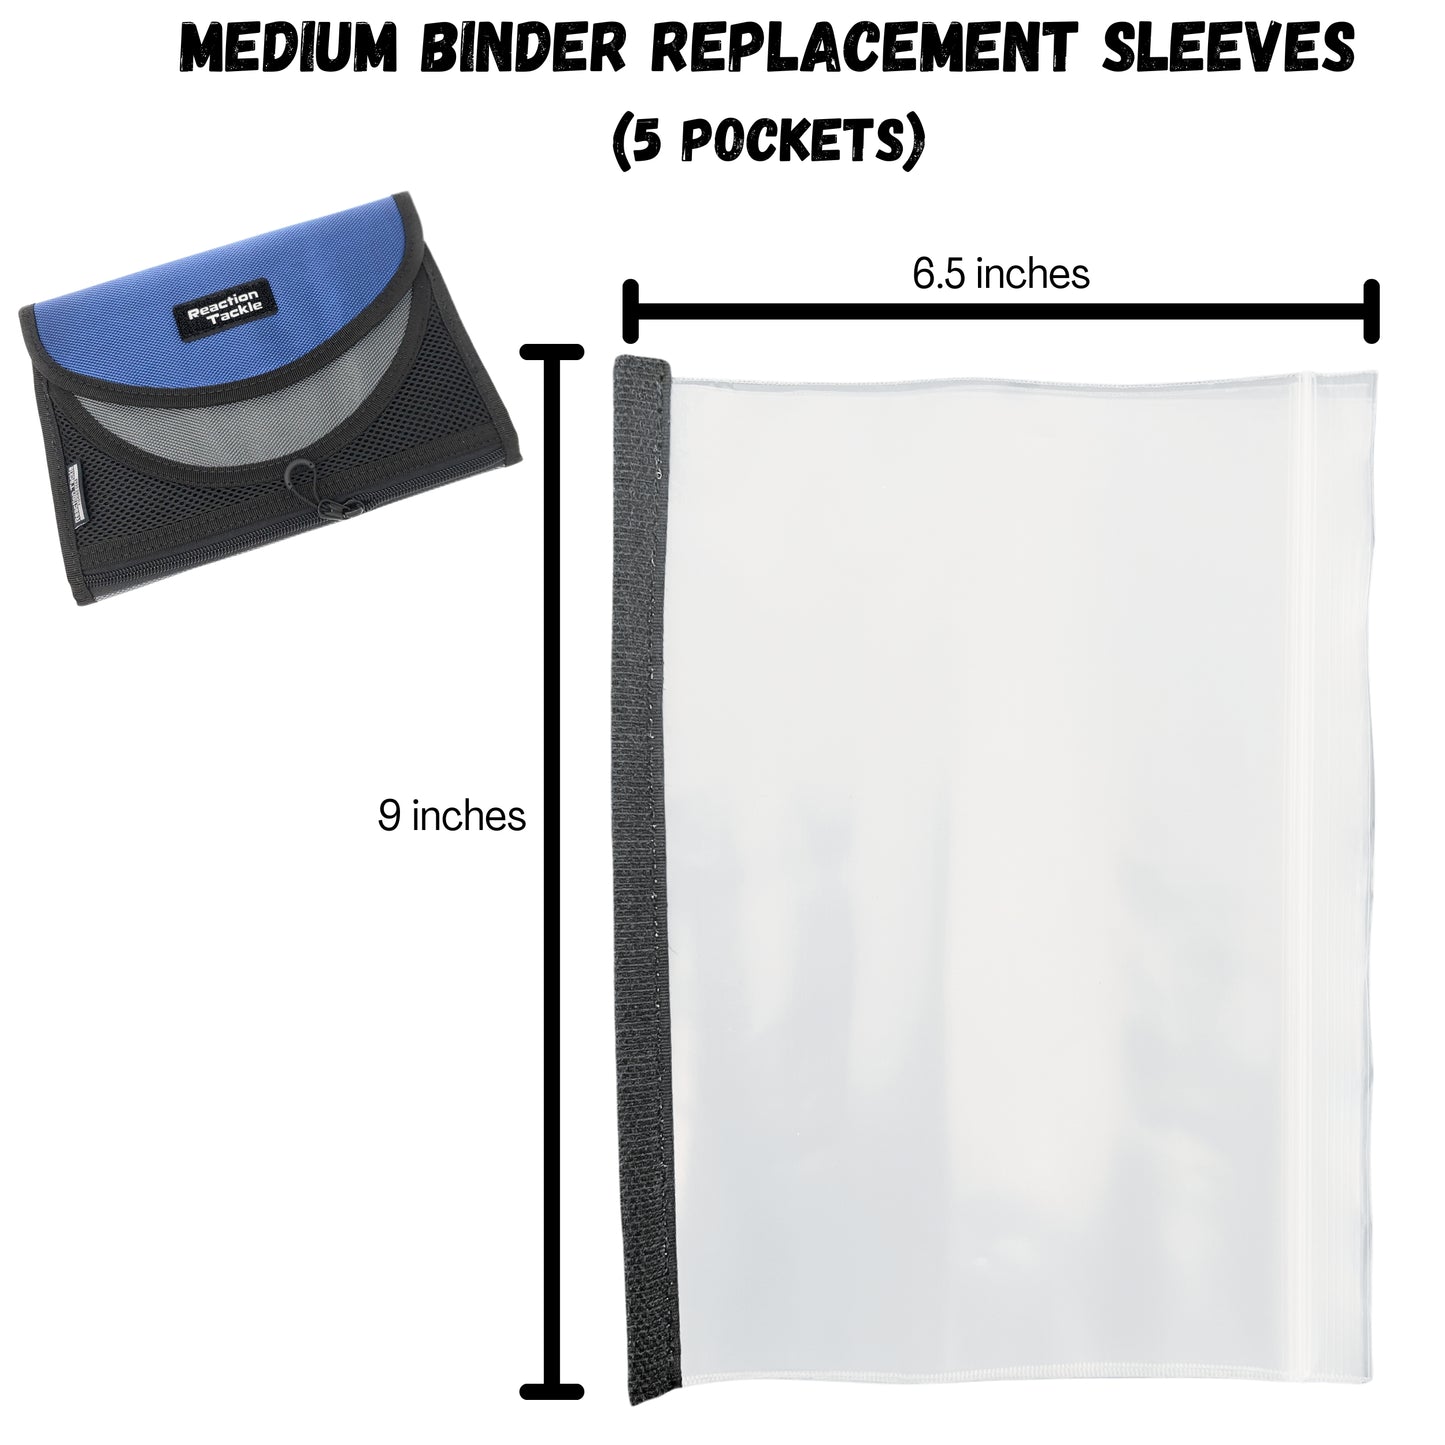 Replacement Sleeves for Small and Medium Binders